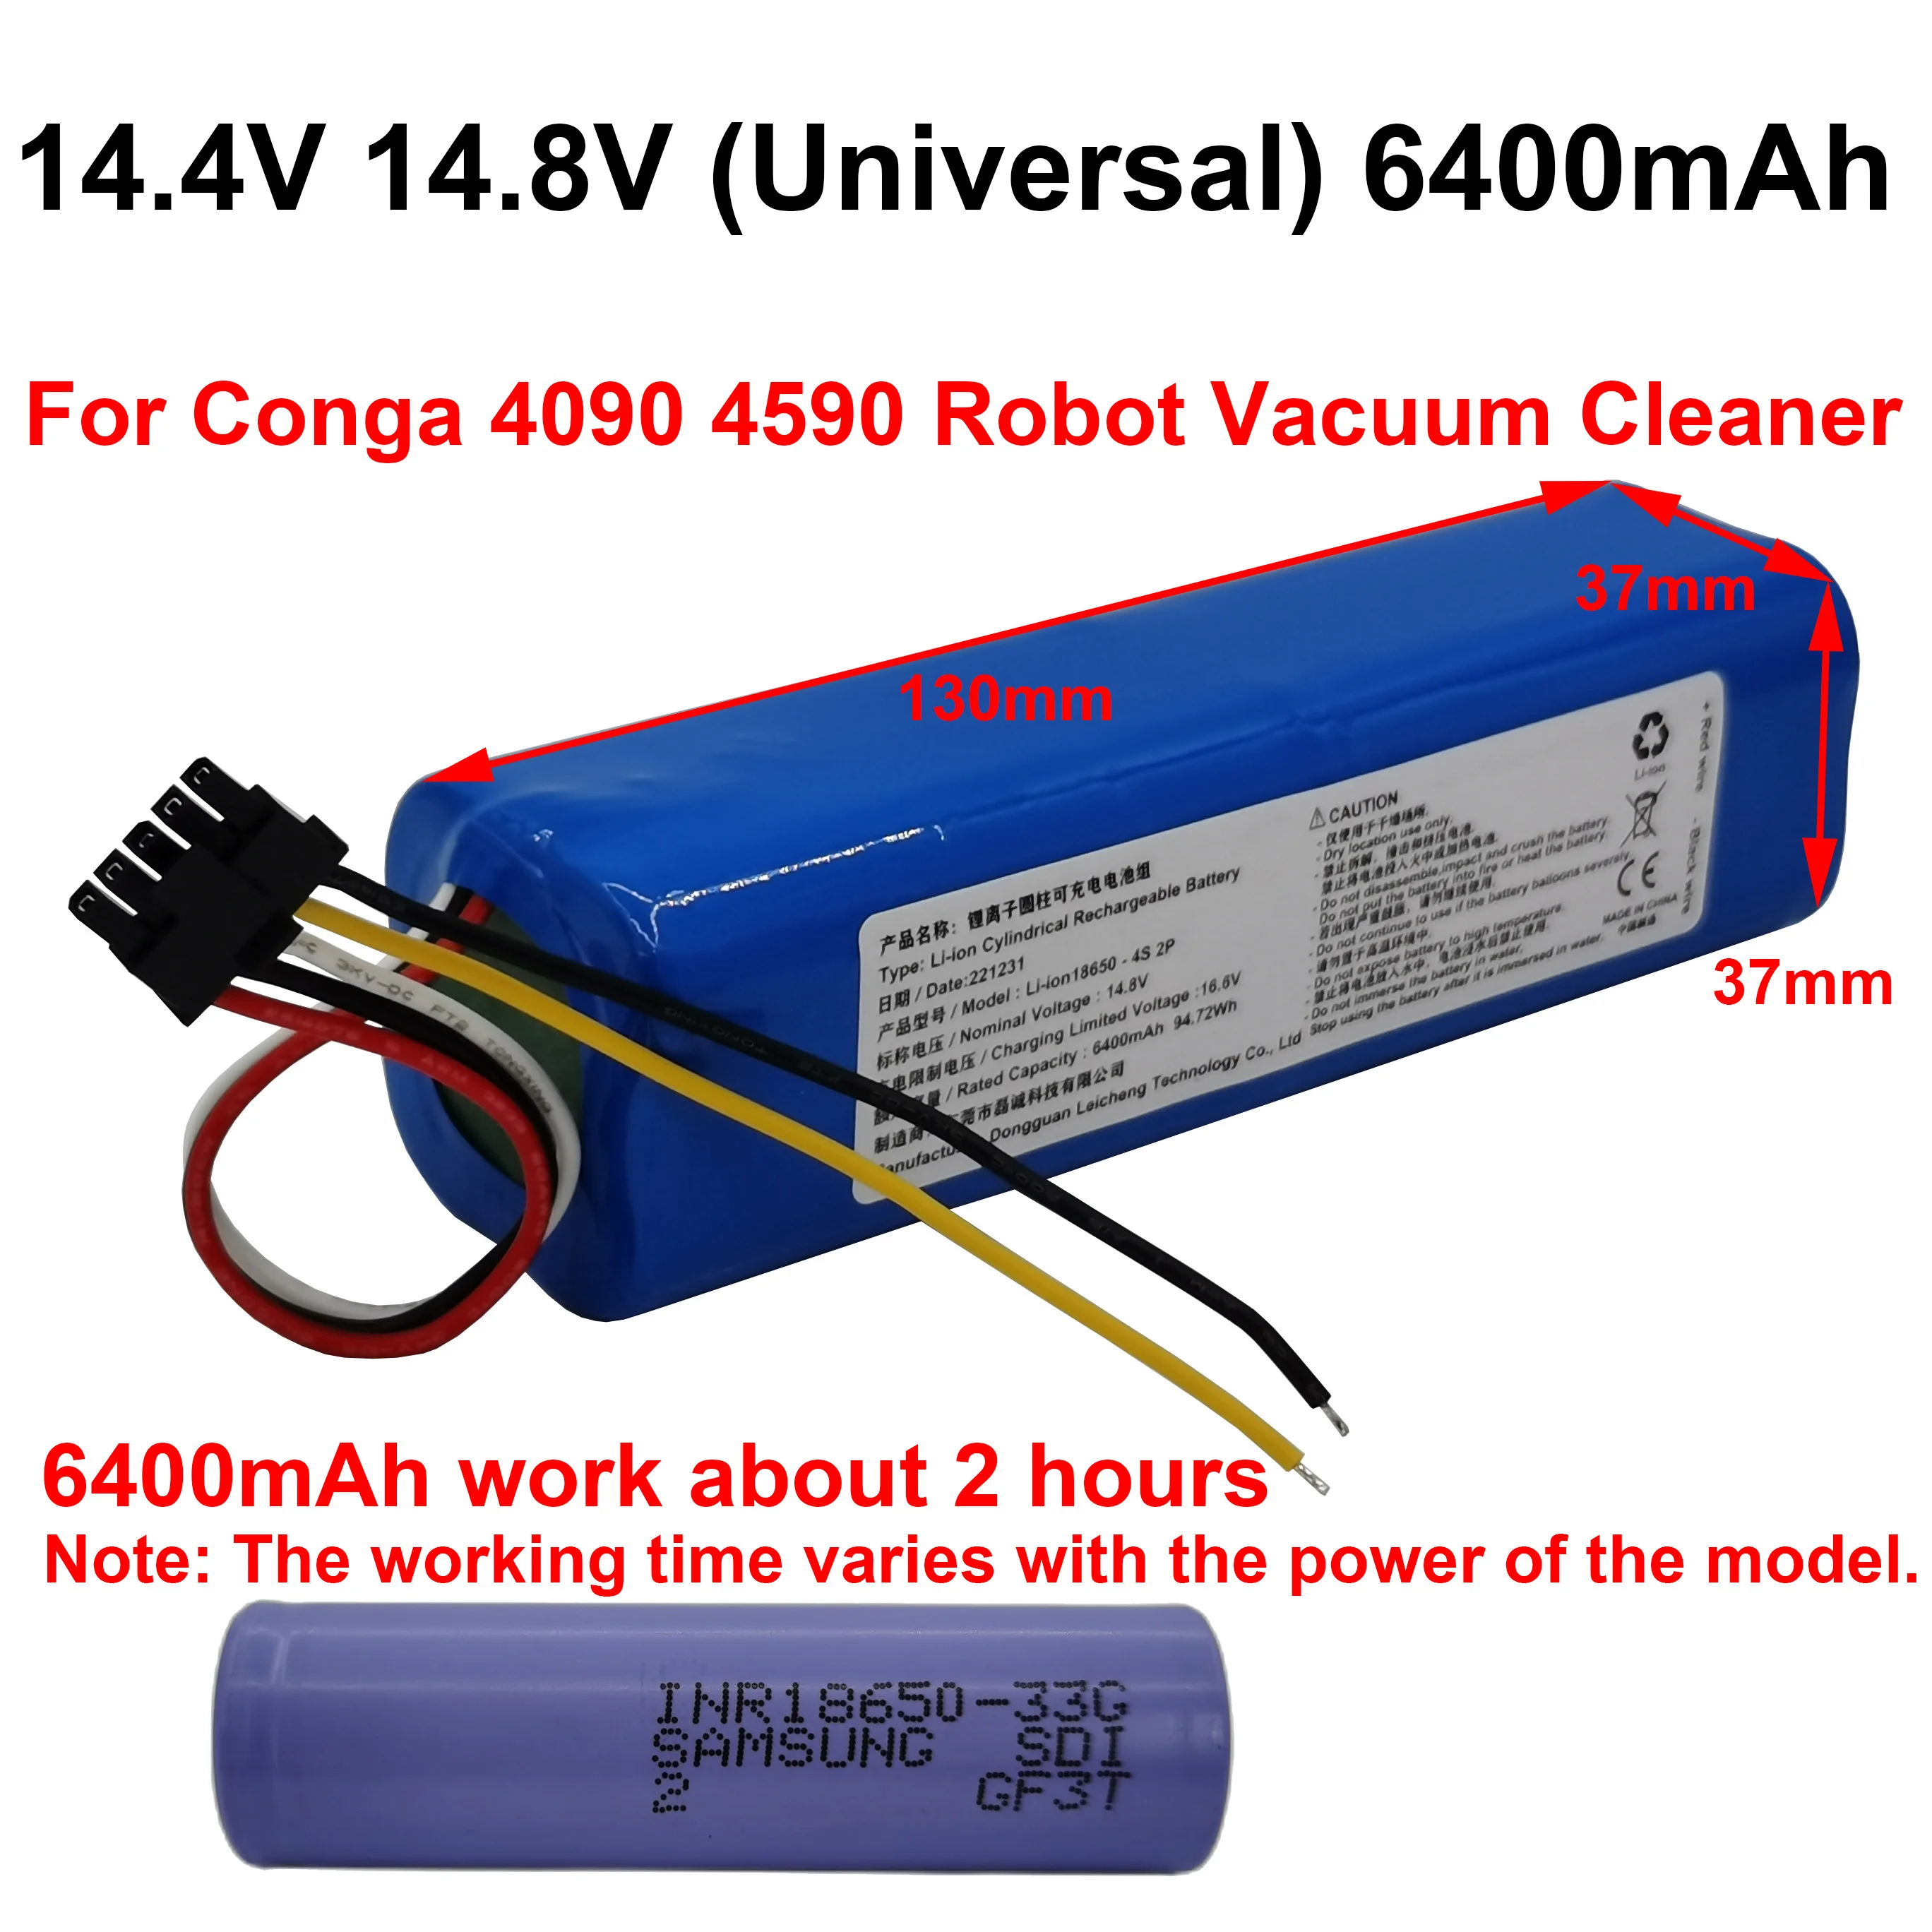 14.4V 14.8V 6400mAh 18650 Li-Ion Cylindrical Rechargeable Battery Pack 4S  2P For Conga 4090 4590 Robot Vacuum Cleaner New